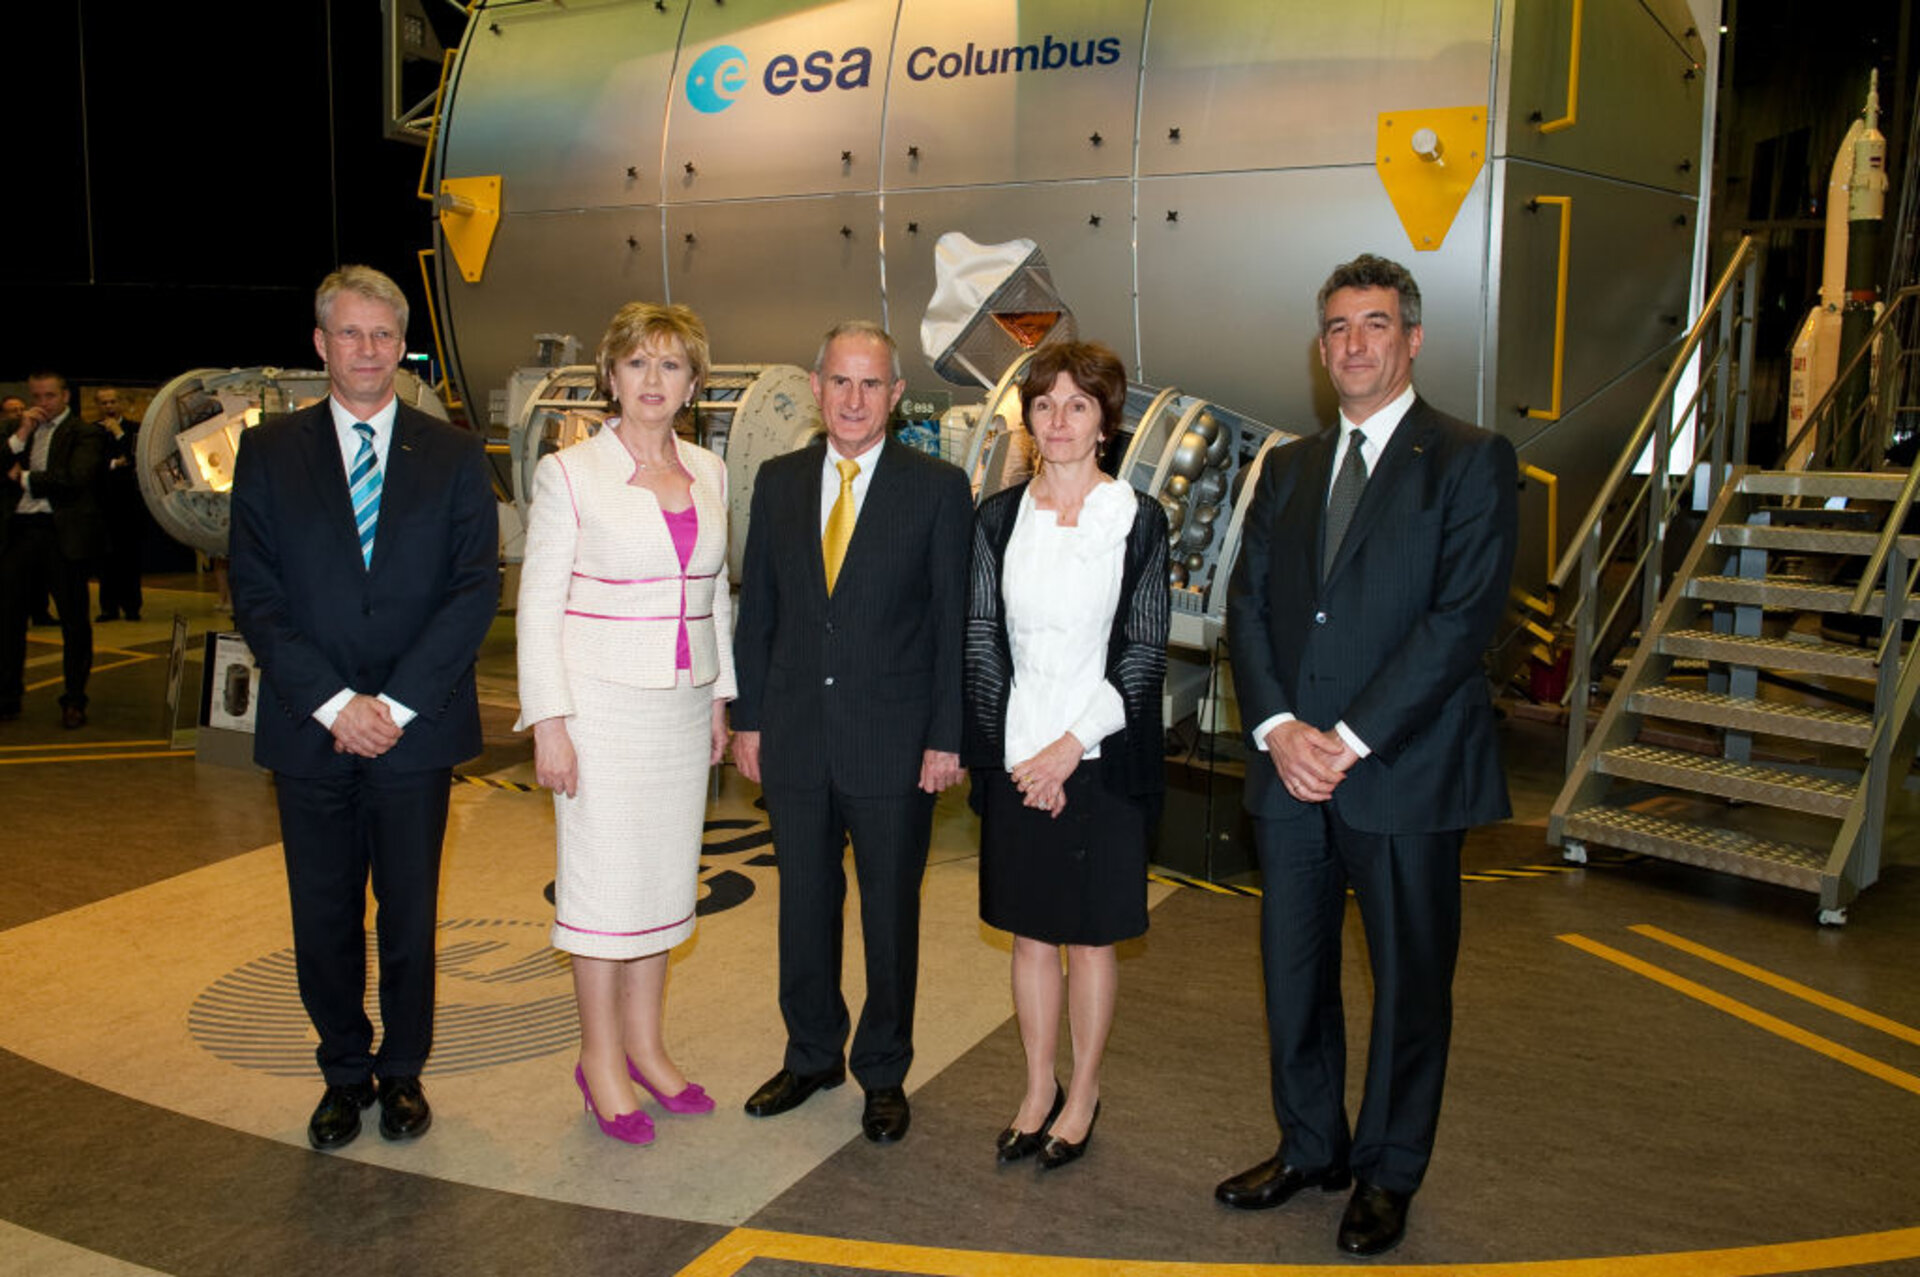 Irish President, Mary McAleese (second from left), pictured with ESA Directors at ESTEC